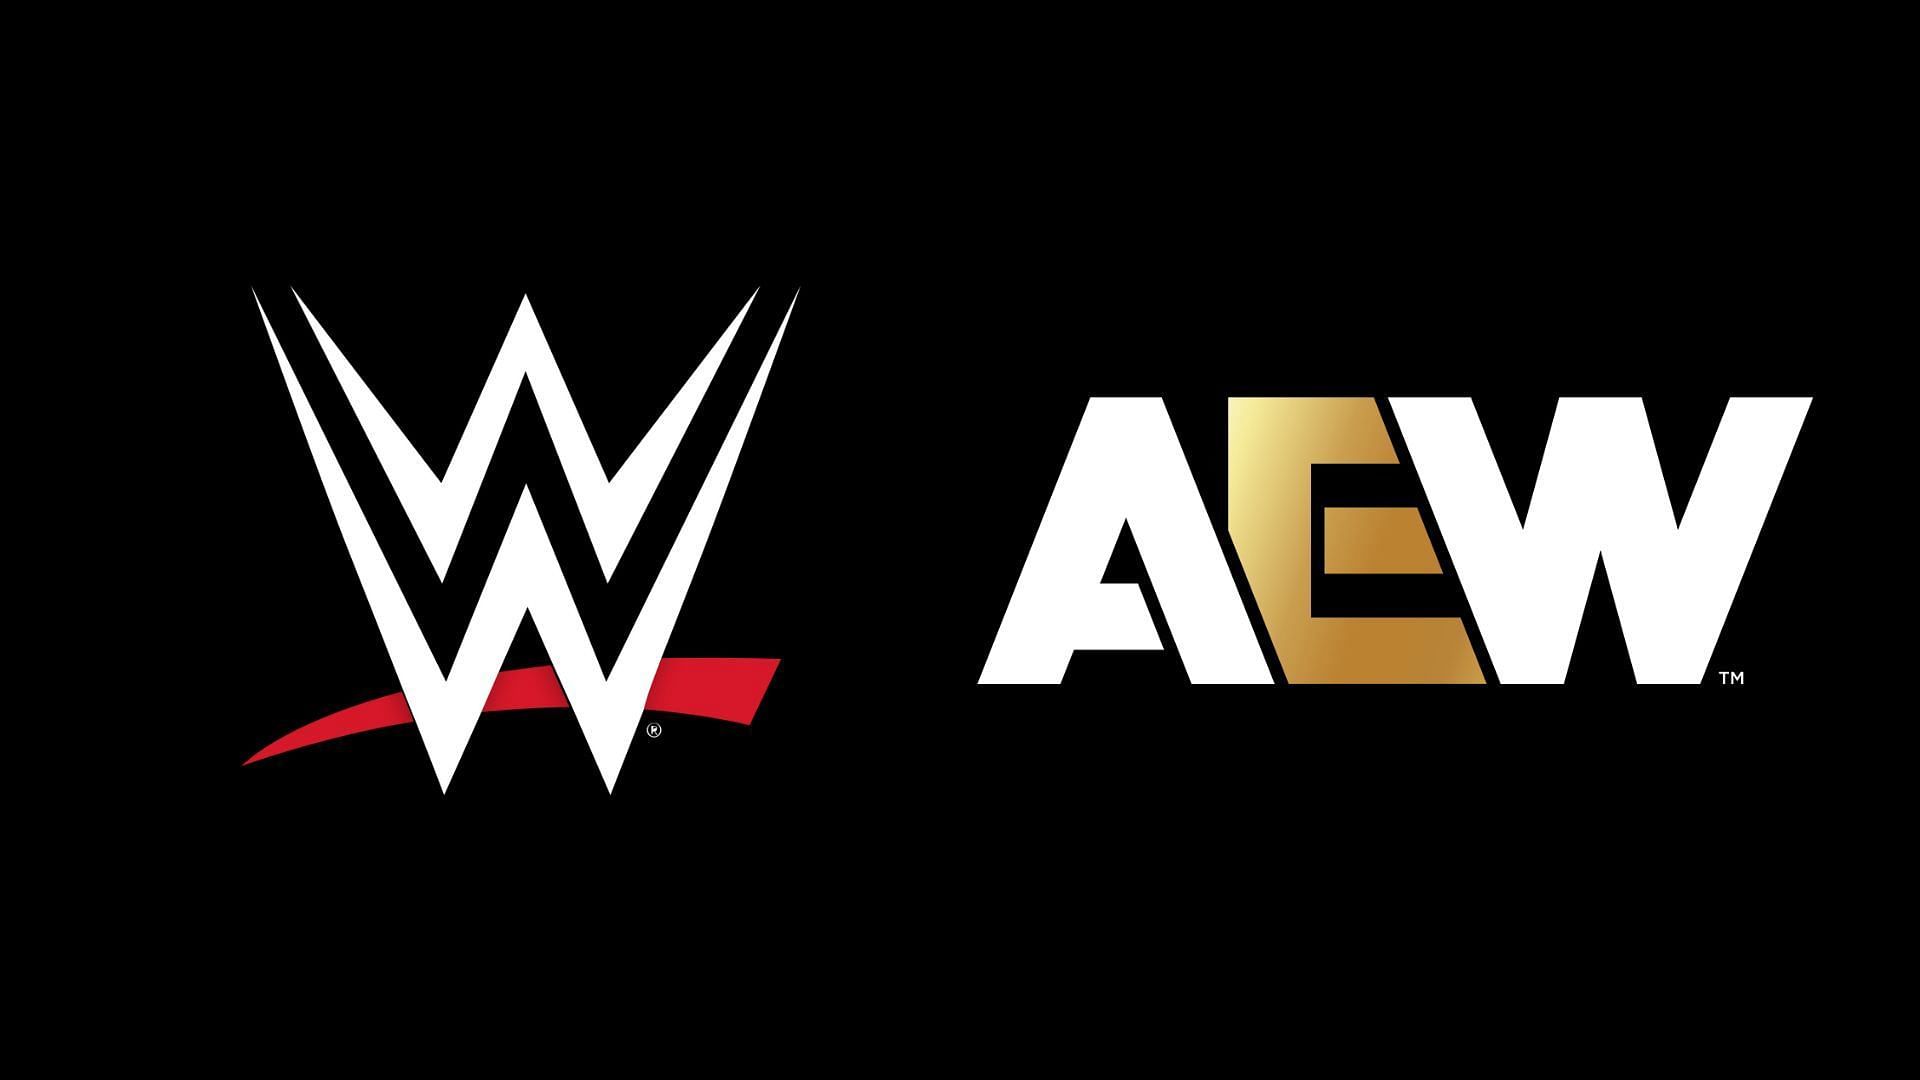 WWE and AEW are top players in the wrestling industry [logos courtesy of WWE Official Twitter account and AEW